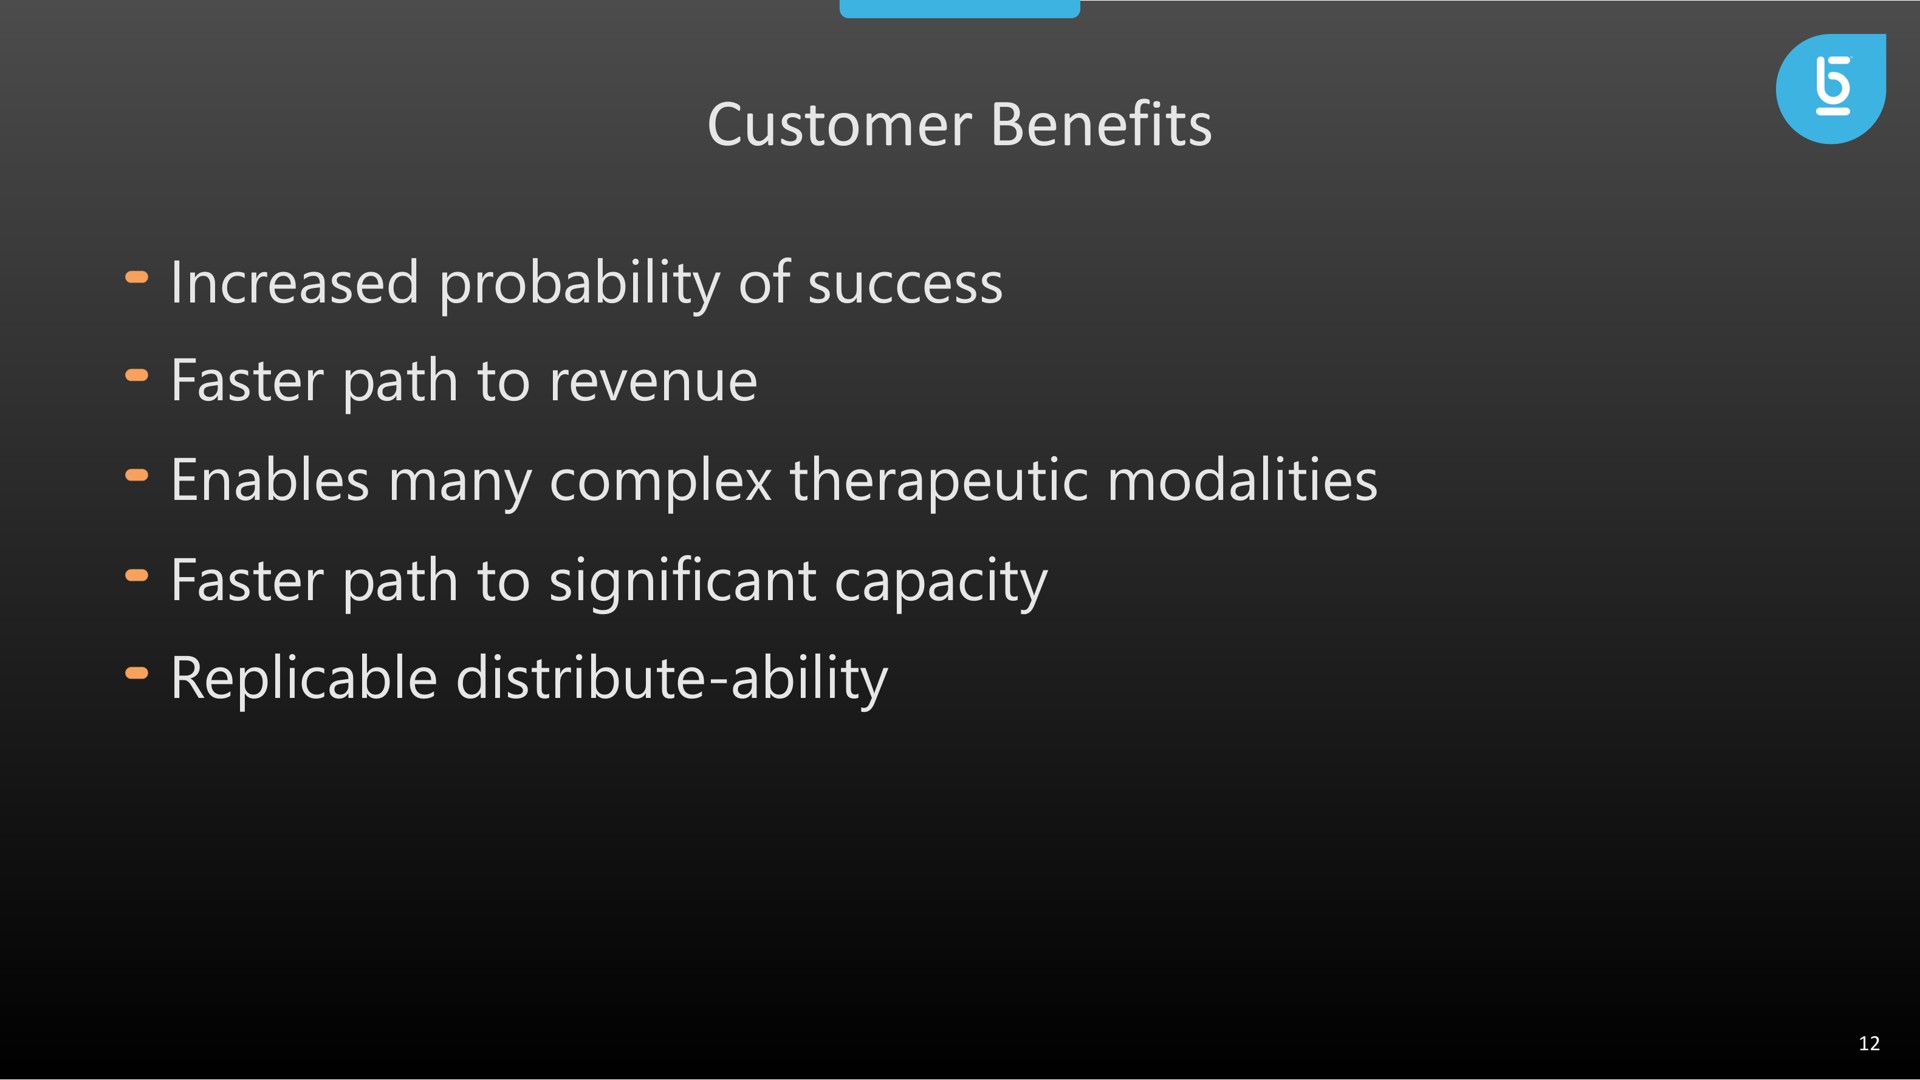 customer benefits increased probability of success faster path to revenue enables many complex therapeutic modalities faster path to significant capacity distribute ability | Berkeley Lights